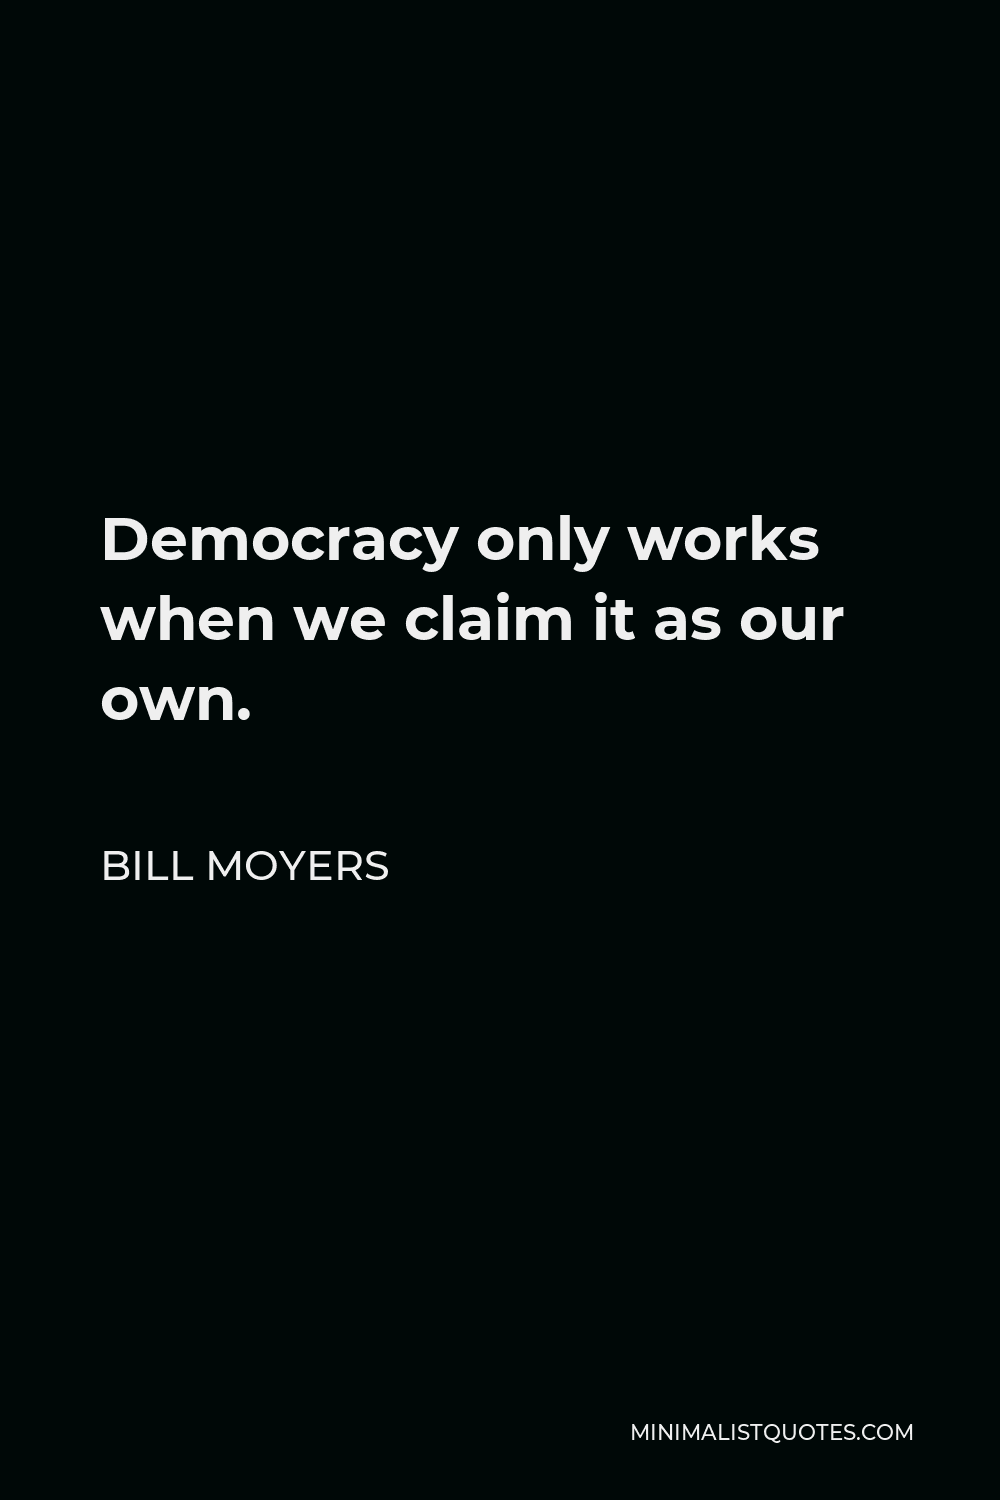 Bill Moyers Quote - Democracy only works when we claim it as our own.